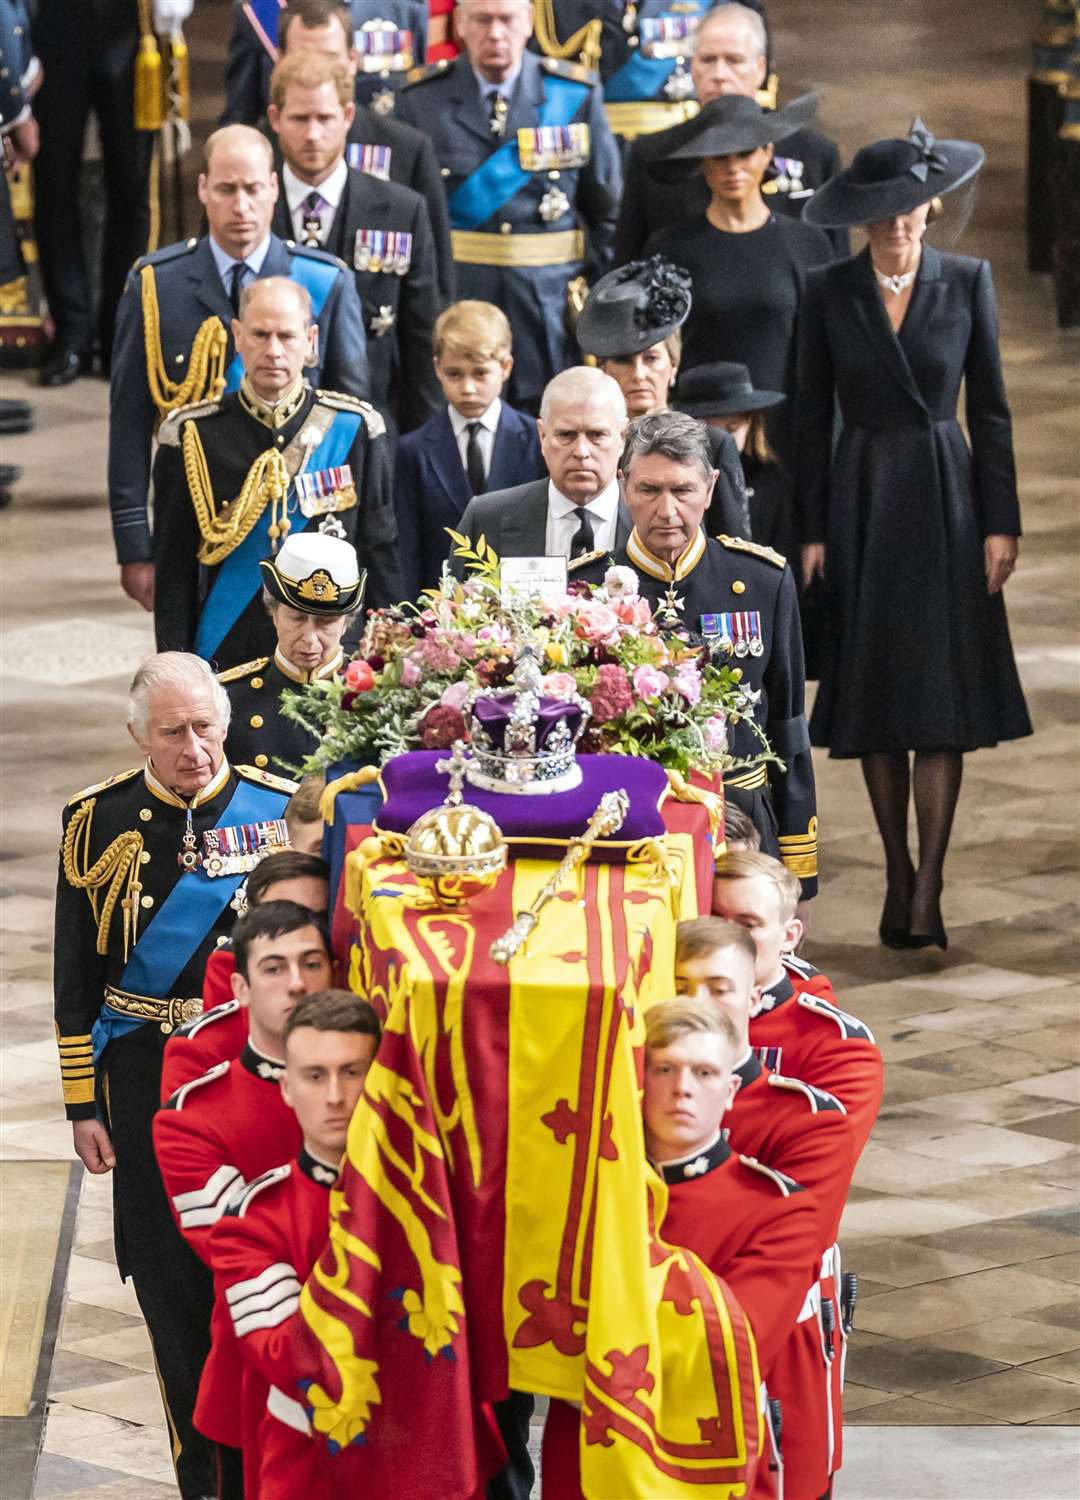 Members of the royal family follow behind the coffin of the Queen as it is carried out of Westminster Abbey after her state funeral (Danny Lawson/PA)